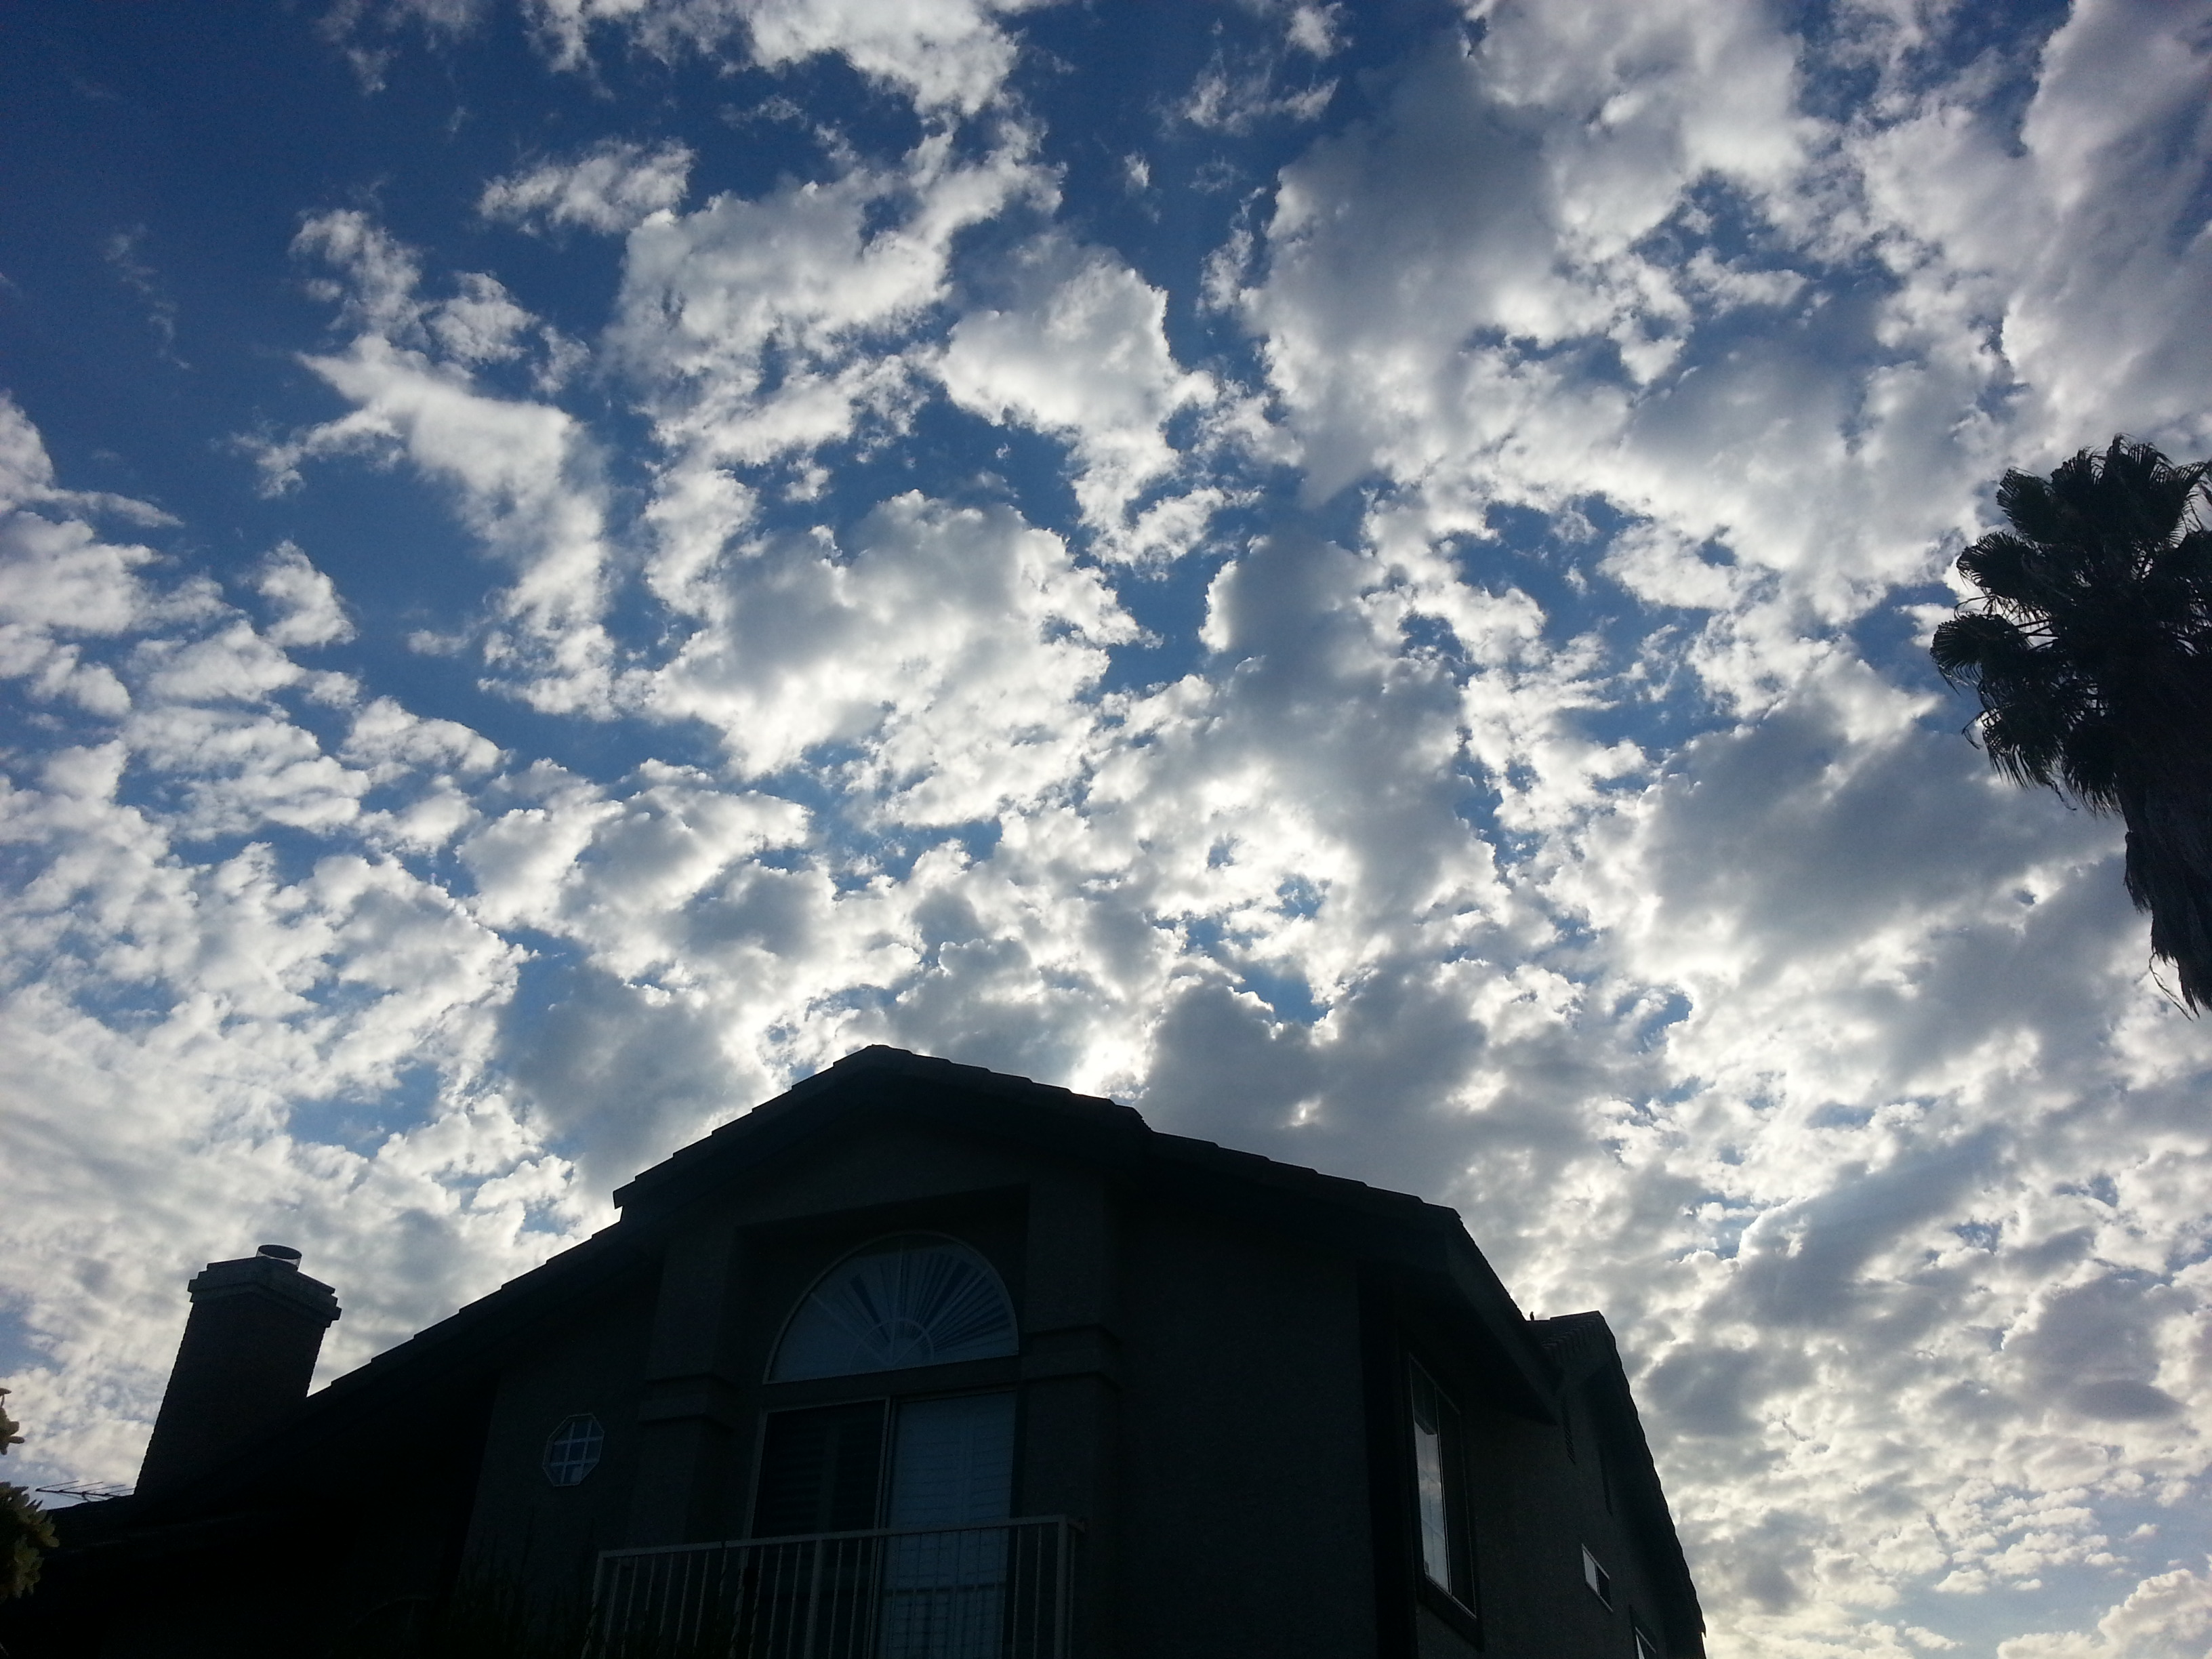 Cool Clouds Over My House In So. California!